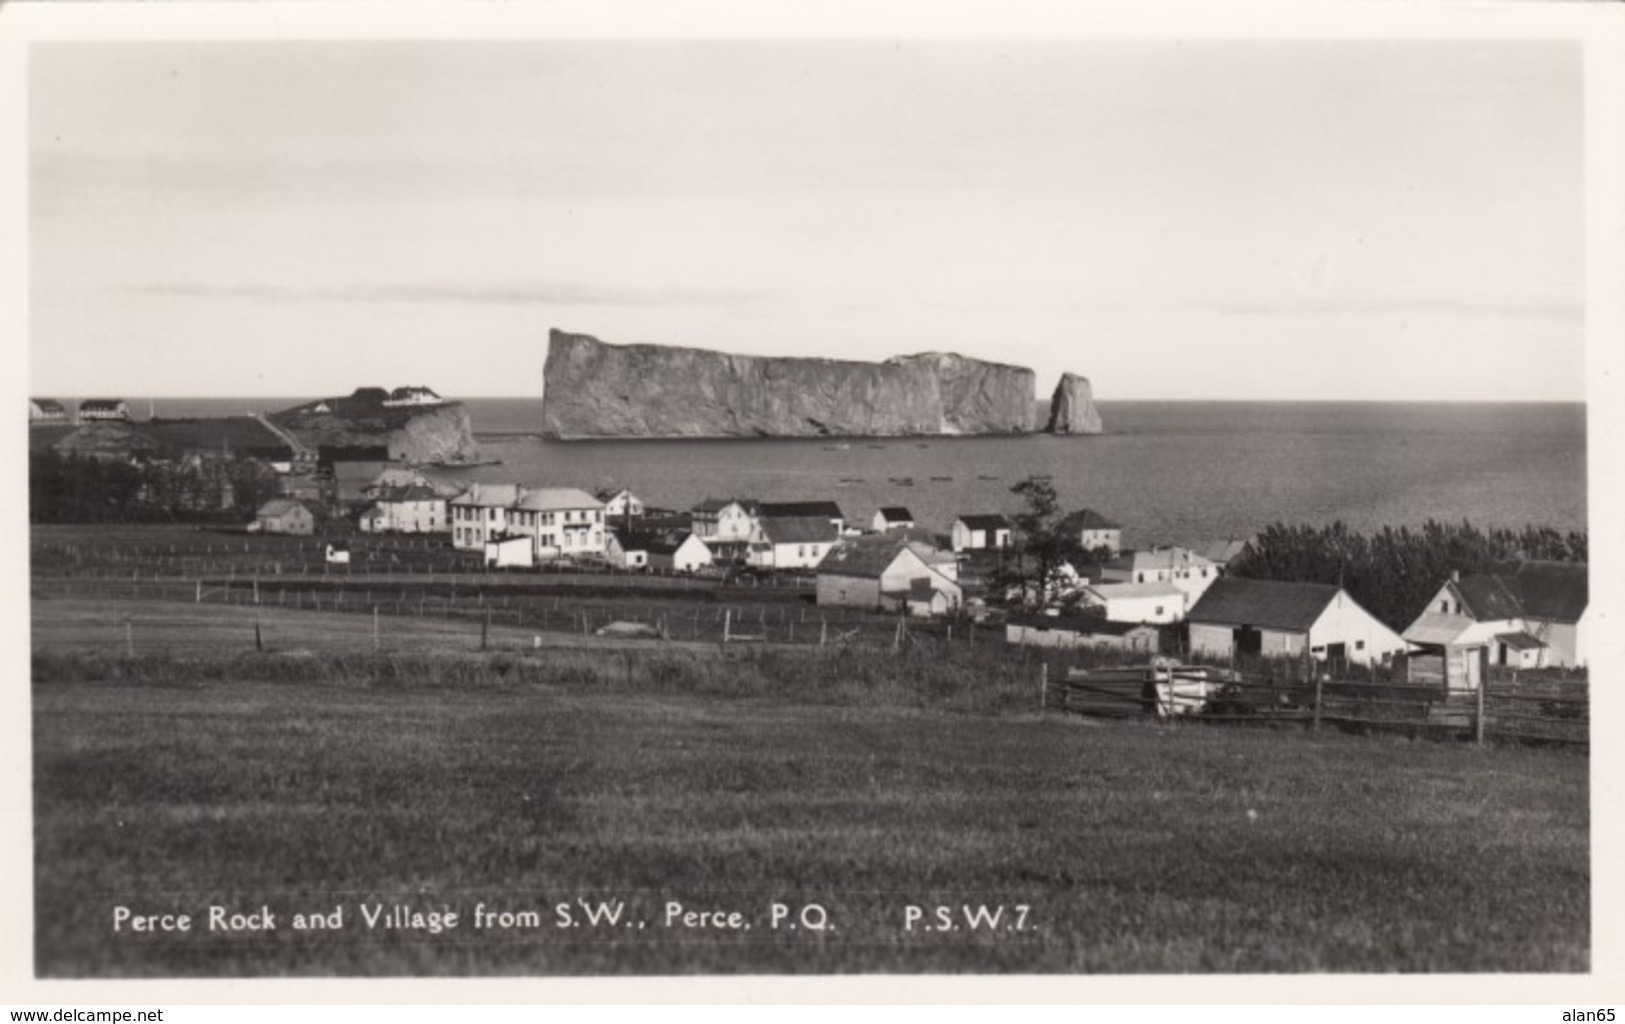 Perce Quebec Canada, Perce Rock And Village On Water, C1940s/50s Vintage Real Photo Postcard - Percé